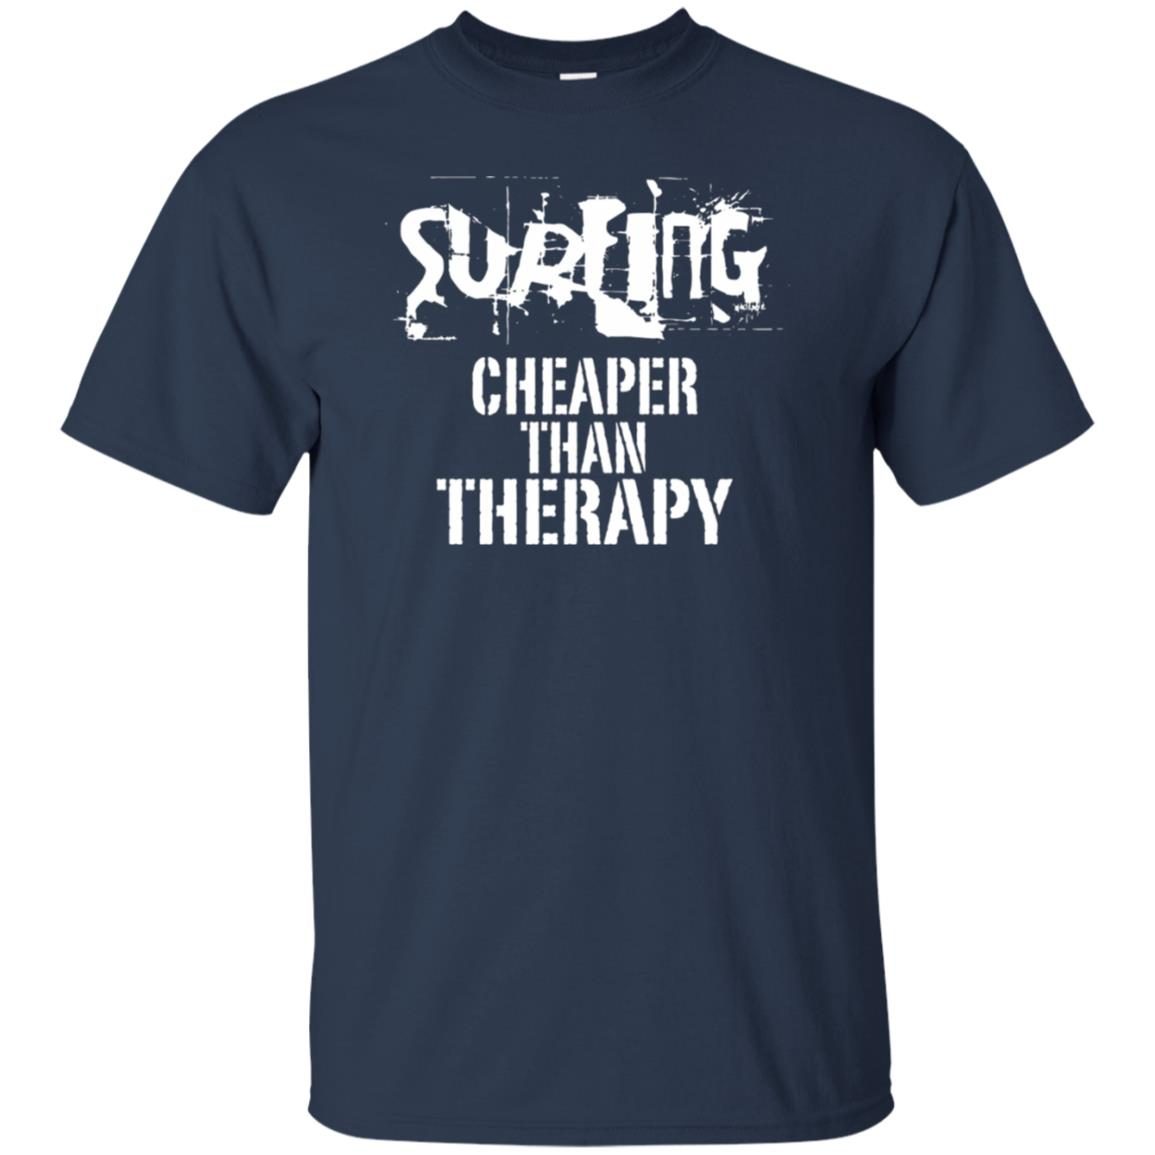 Surfing, Cheaper Than Therapy Shirt 12